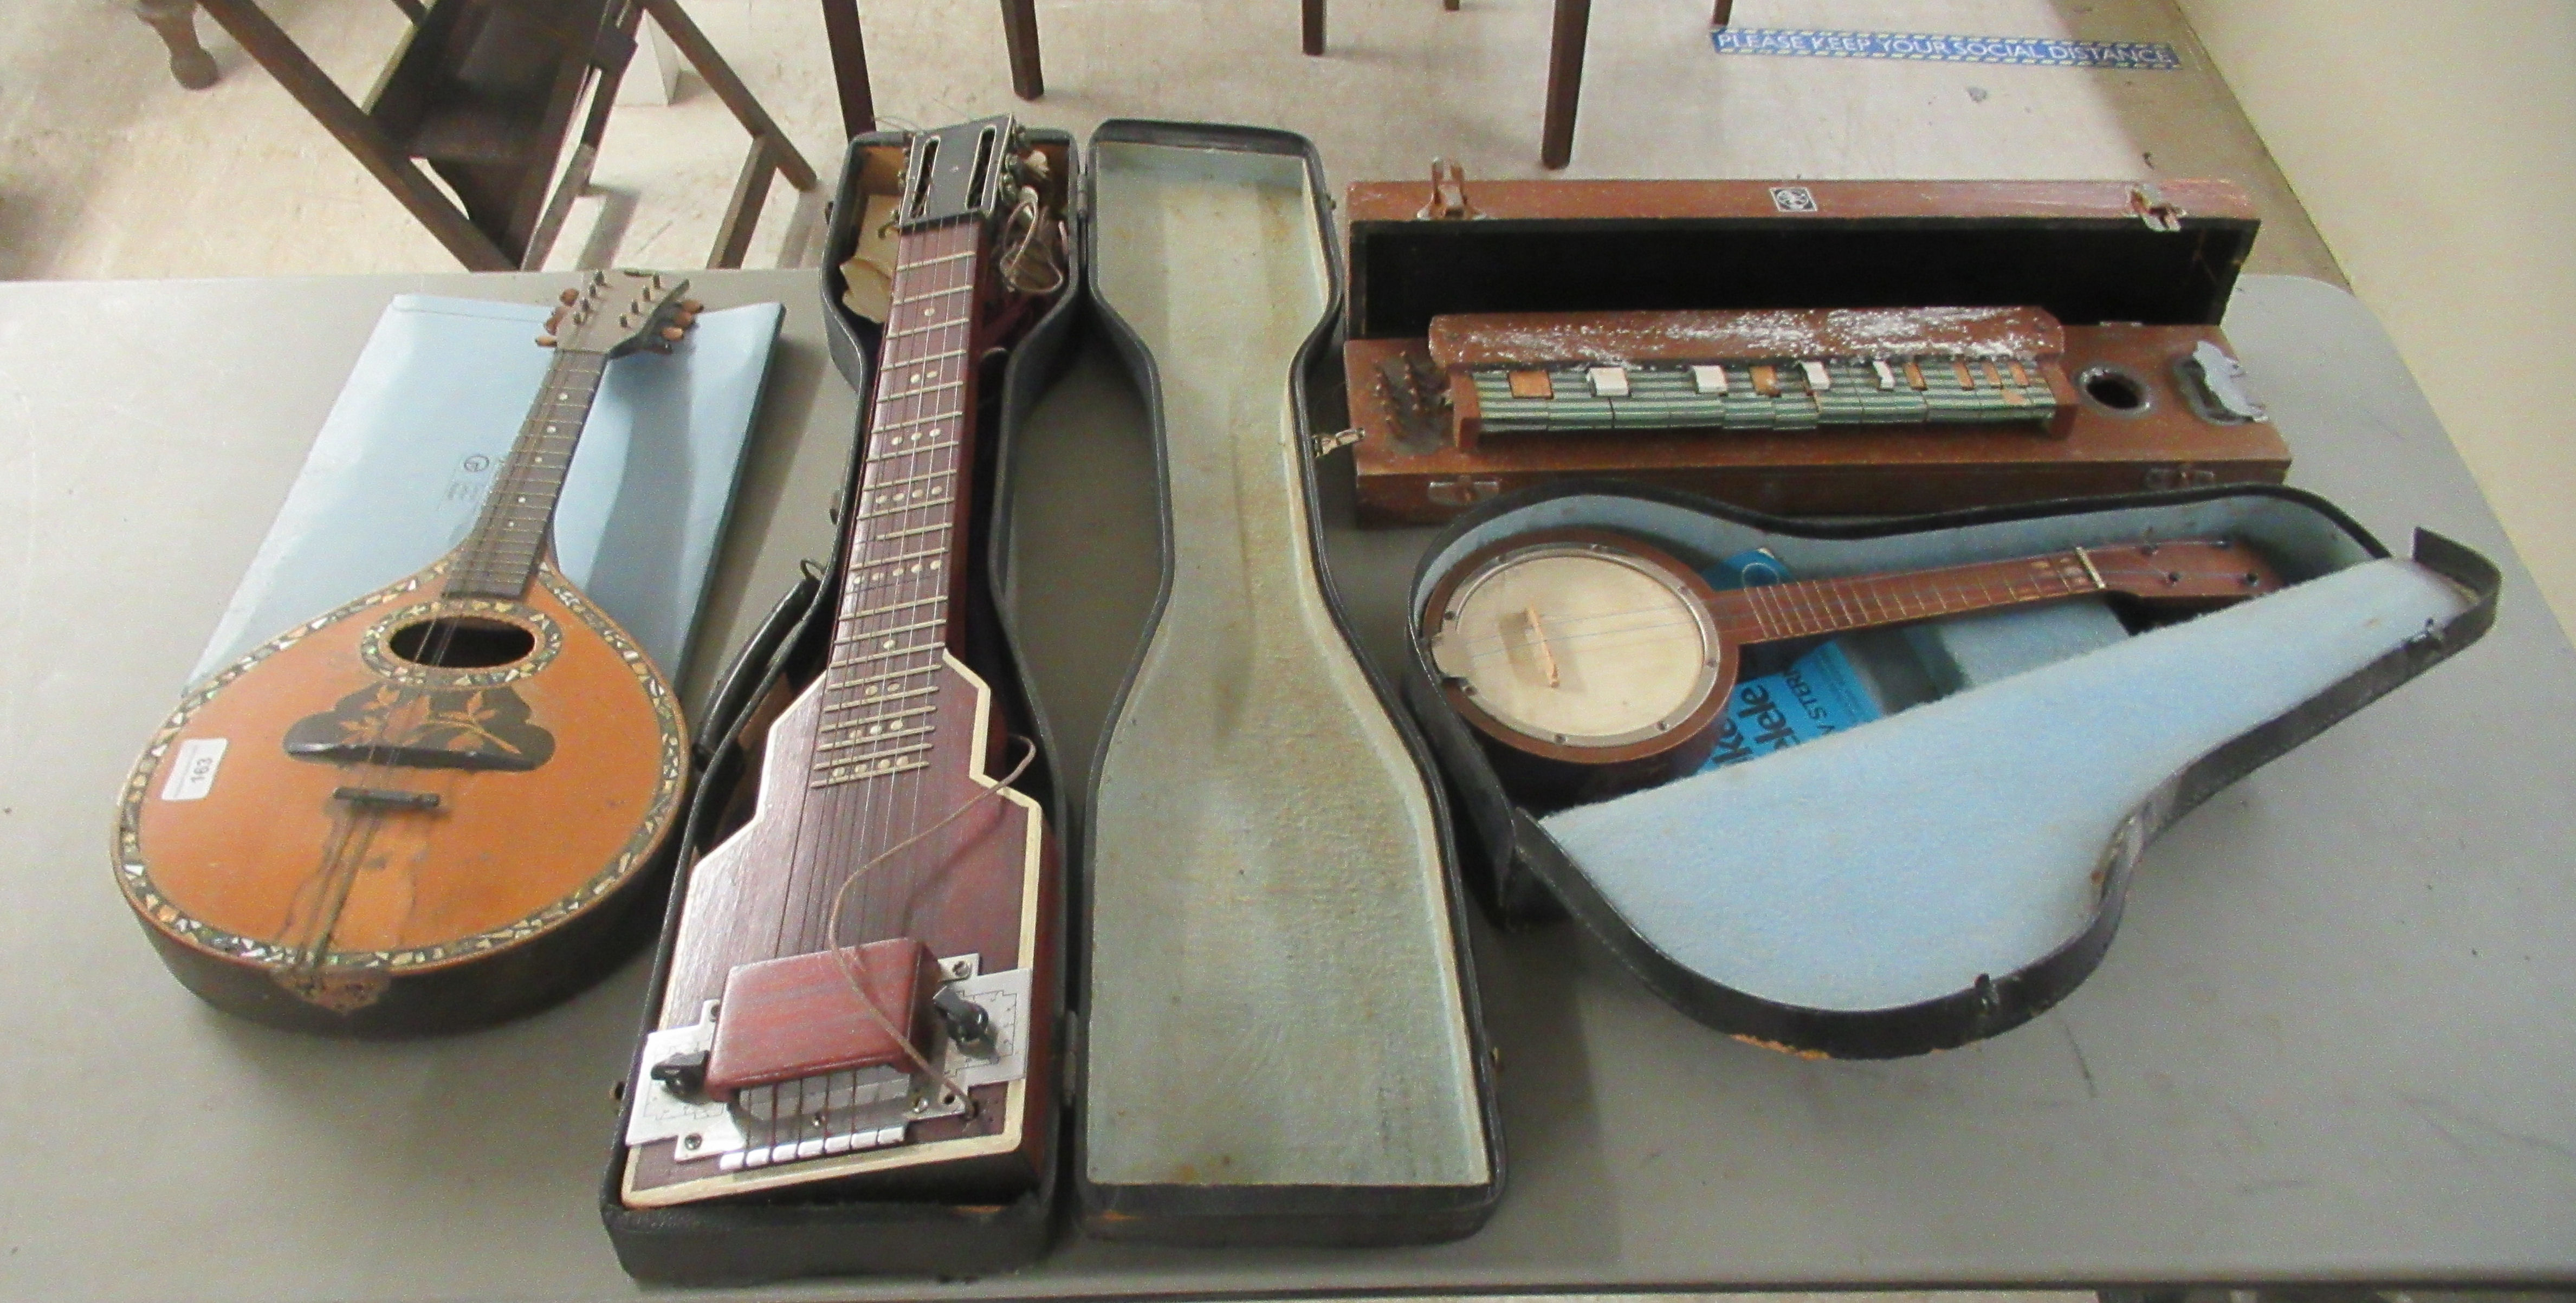 Musical instruments: to include an electric guitar; and a lute